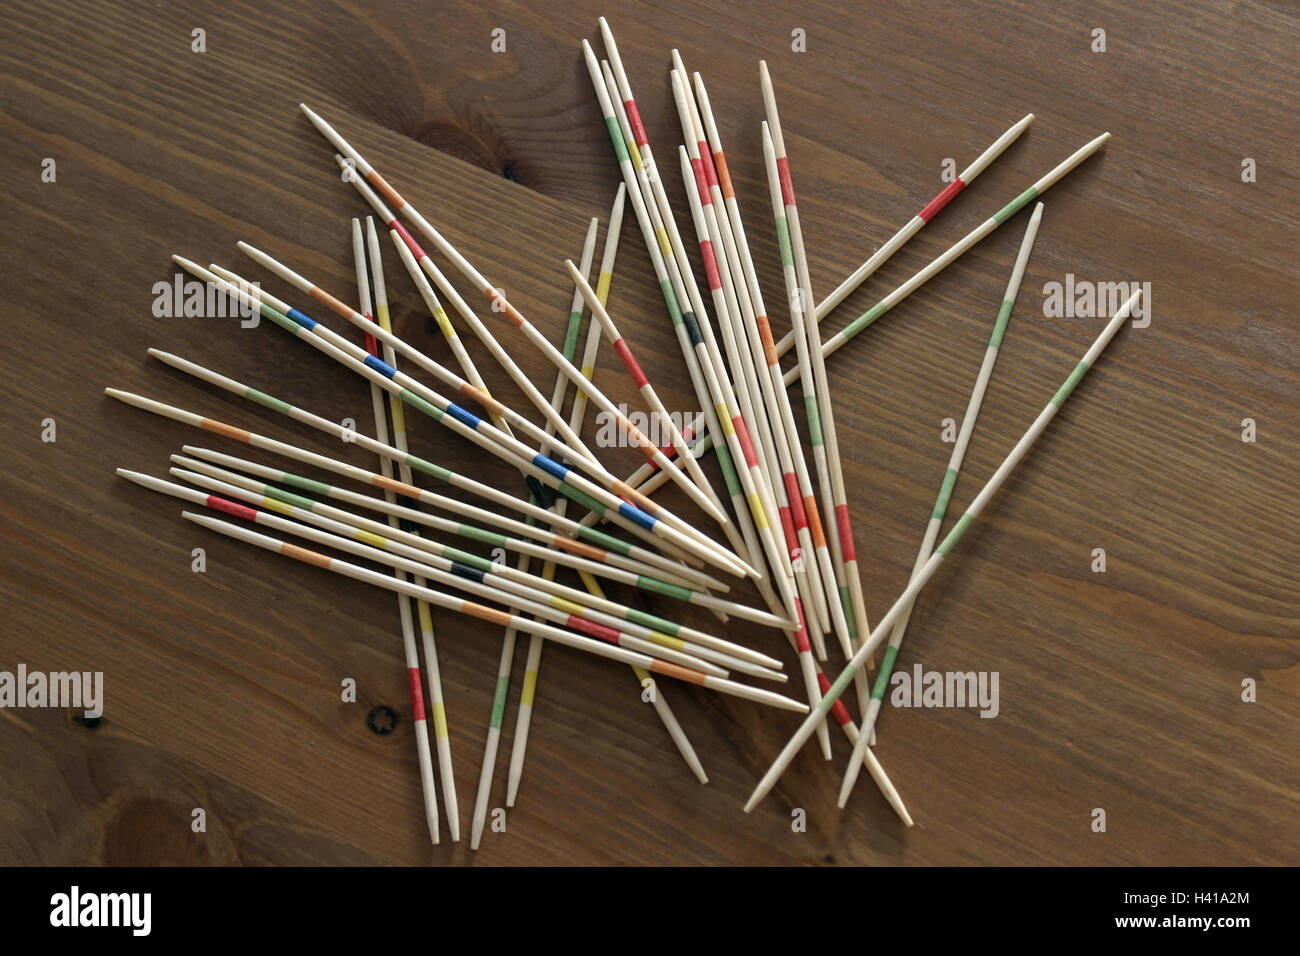 Game, pick-up-sticks, leisure time, entertainment, leisure activity, games, parlour game, skill game, Wooden rod, rod, colourfully, in a mess, heaps, tangle, play, gather, record, lift, skill, skill, material recording, Still life Stock Photo